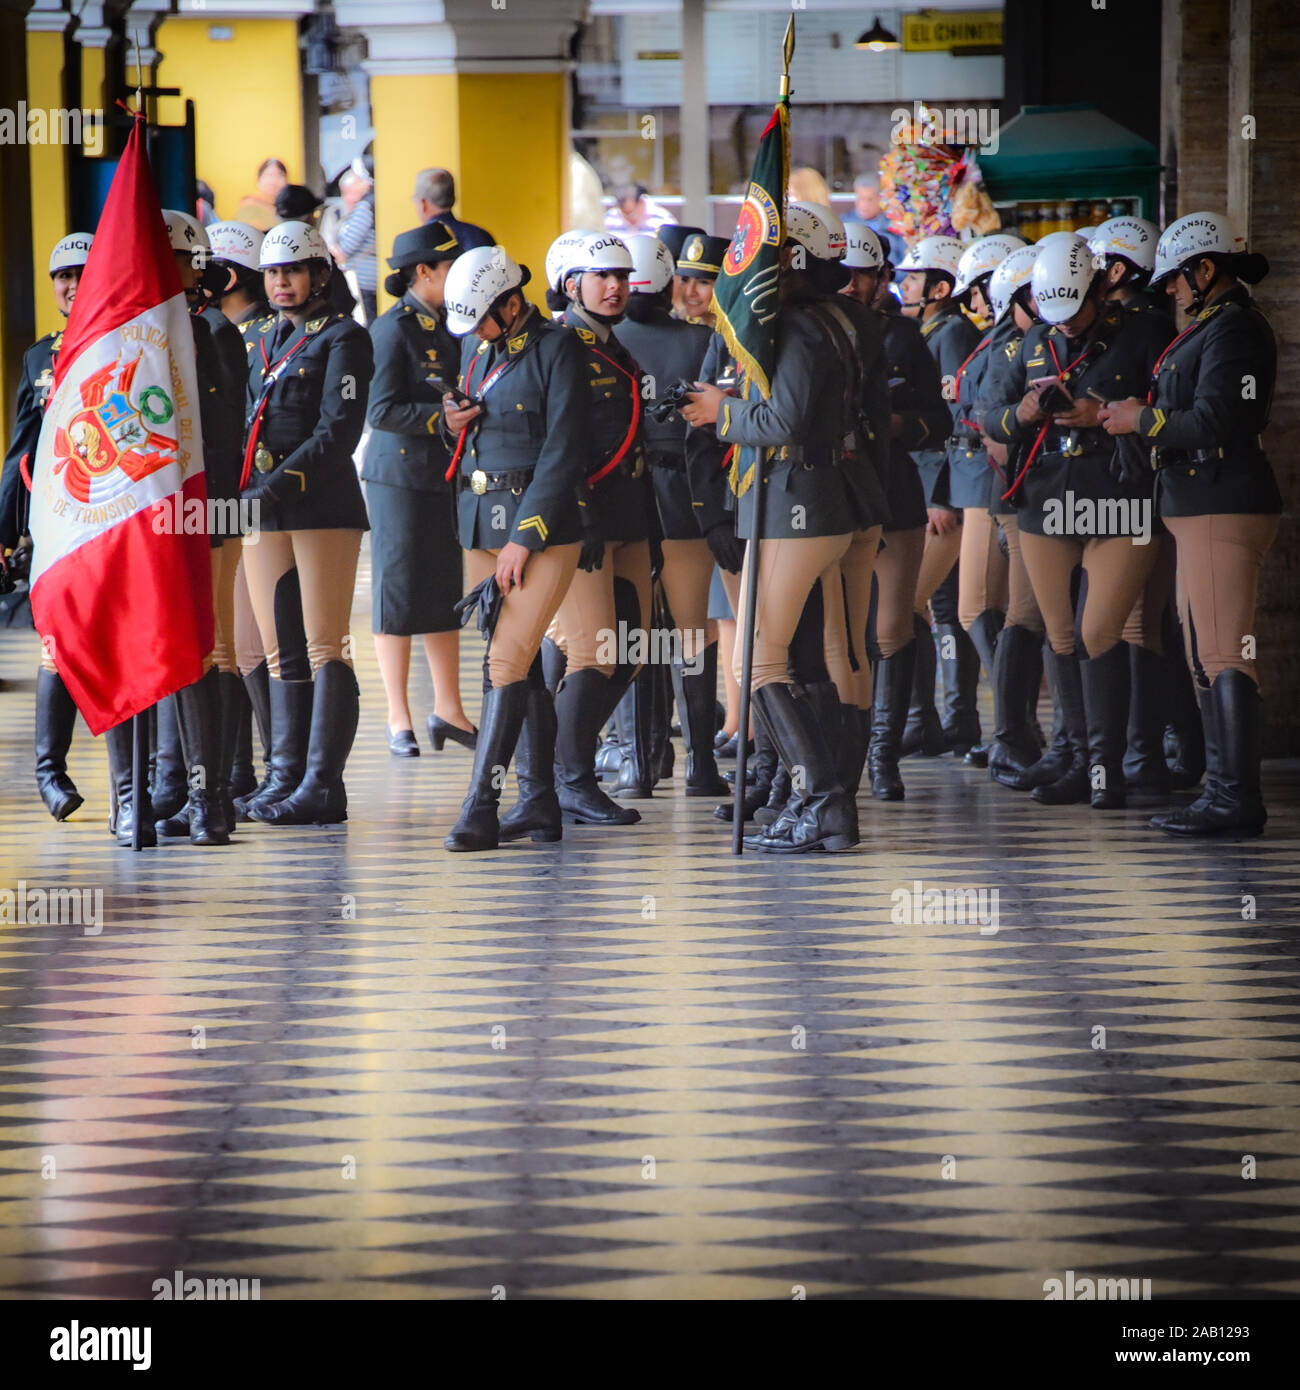 Lima, Peru - Nov 17, 2019: Female officers from the Peruvian Police Force in the Plaza de Armas Stock Photo